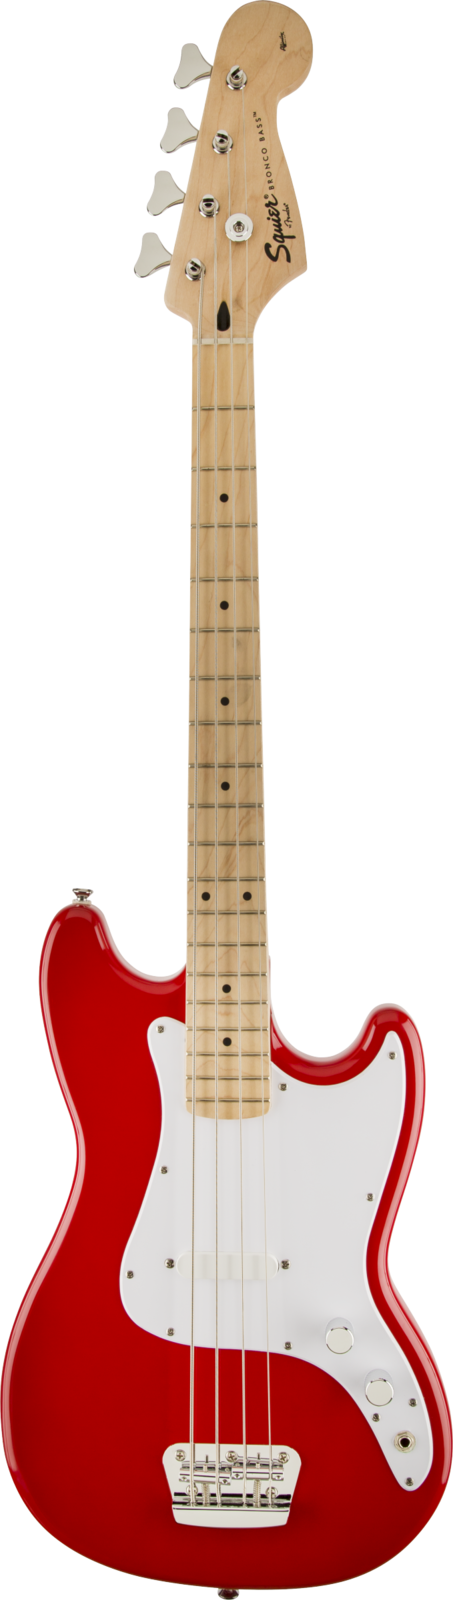 Squier Bronco Bass Torino Red Pack